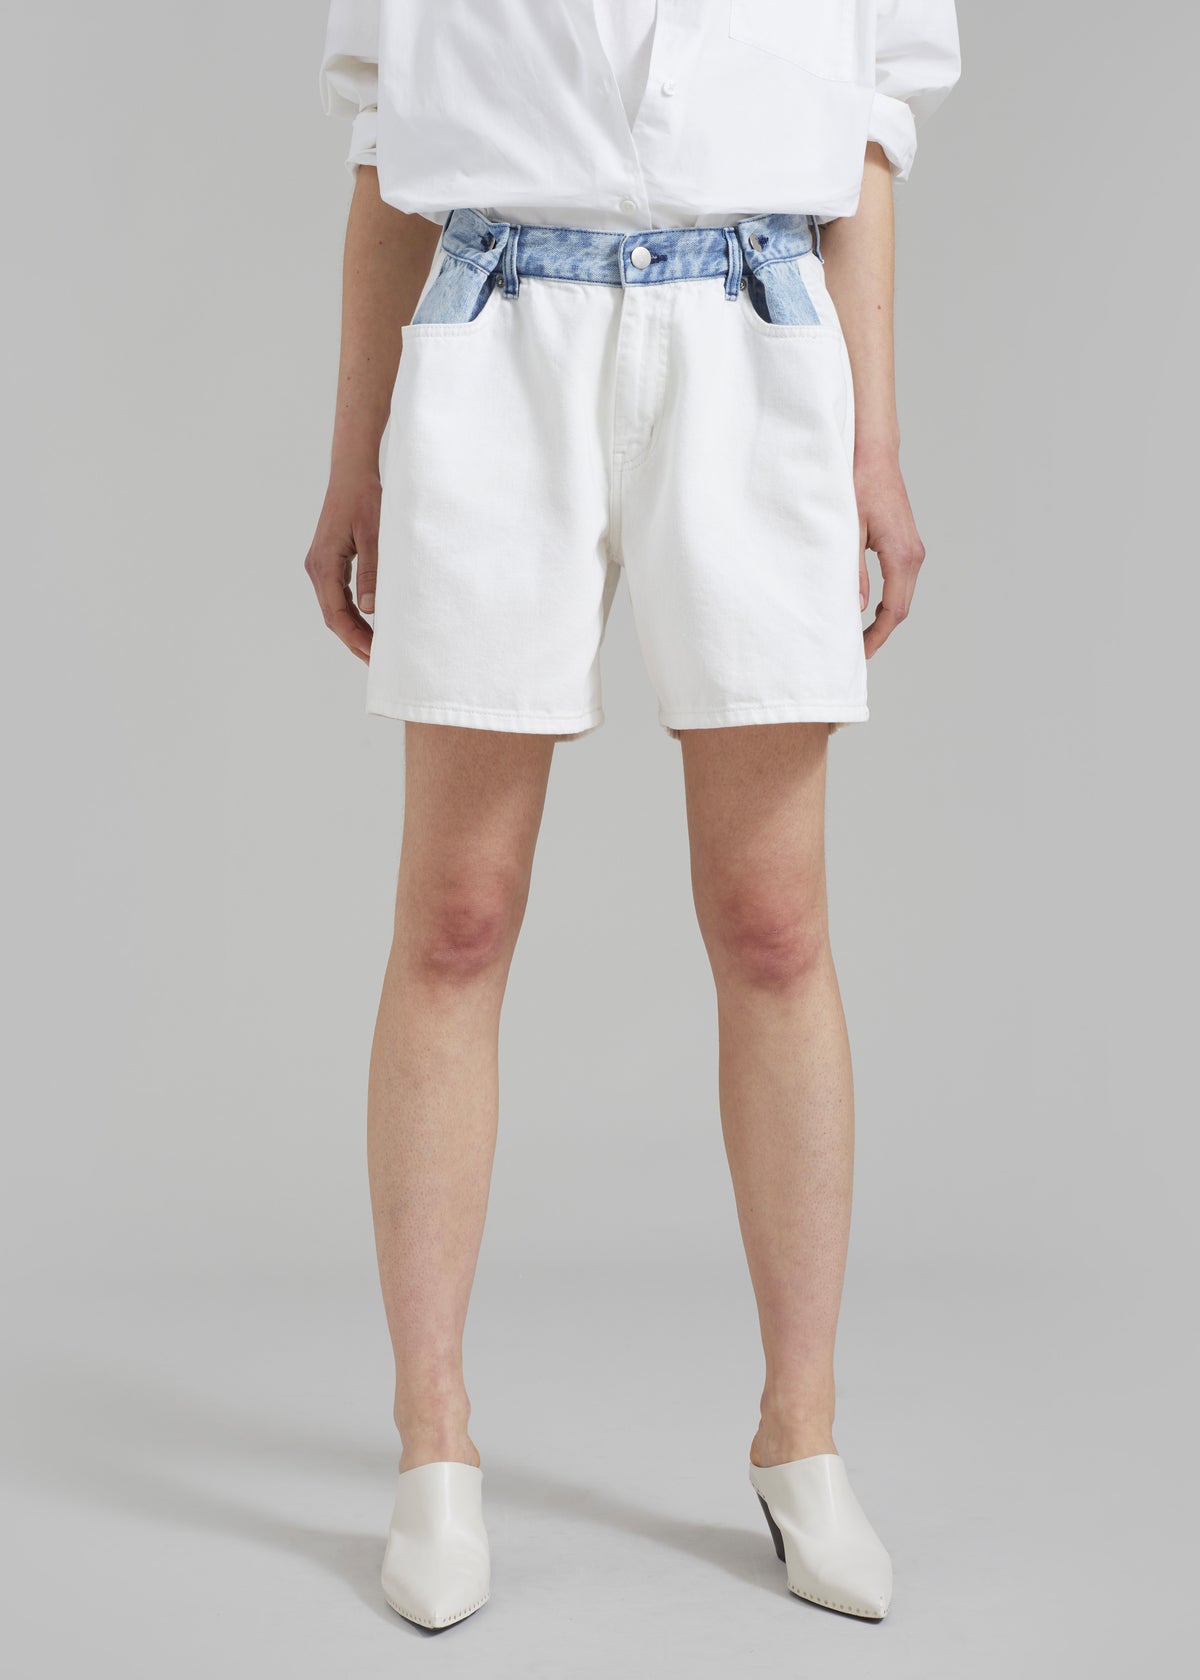 The Shorts the discount Frankie buy, Shop Denim receive - Off White/Blue you larger Hayla will The you Contrast more